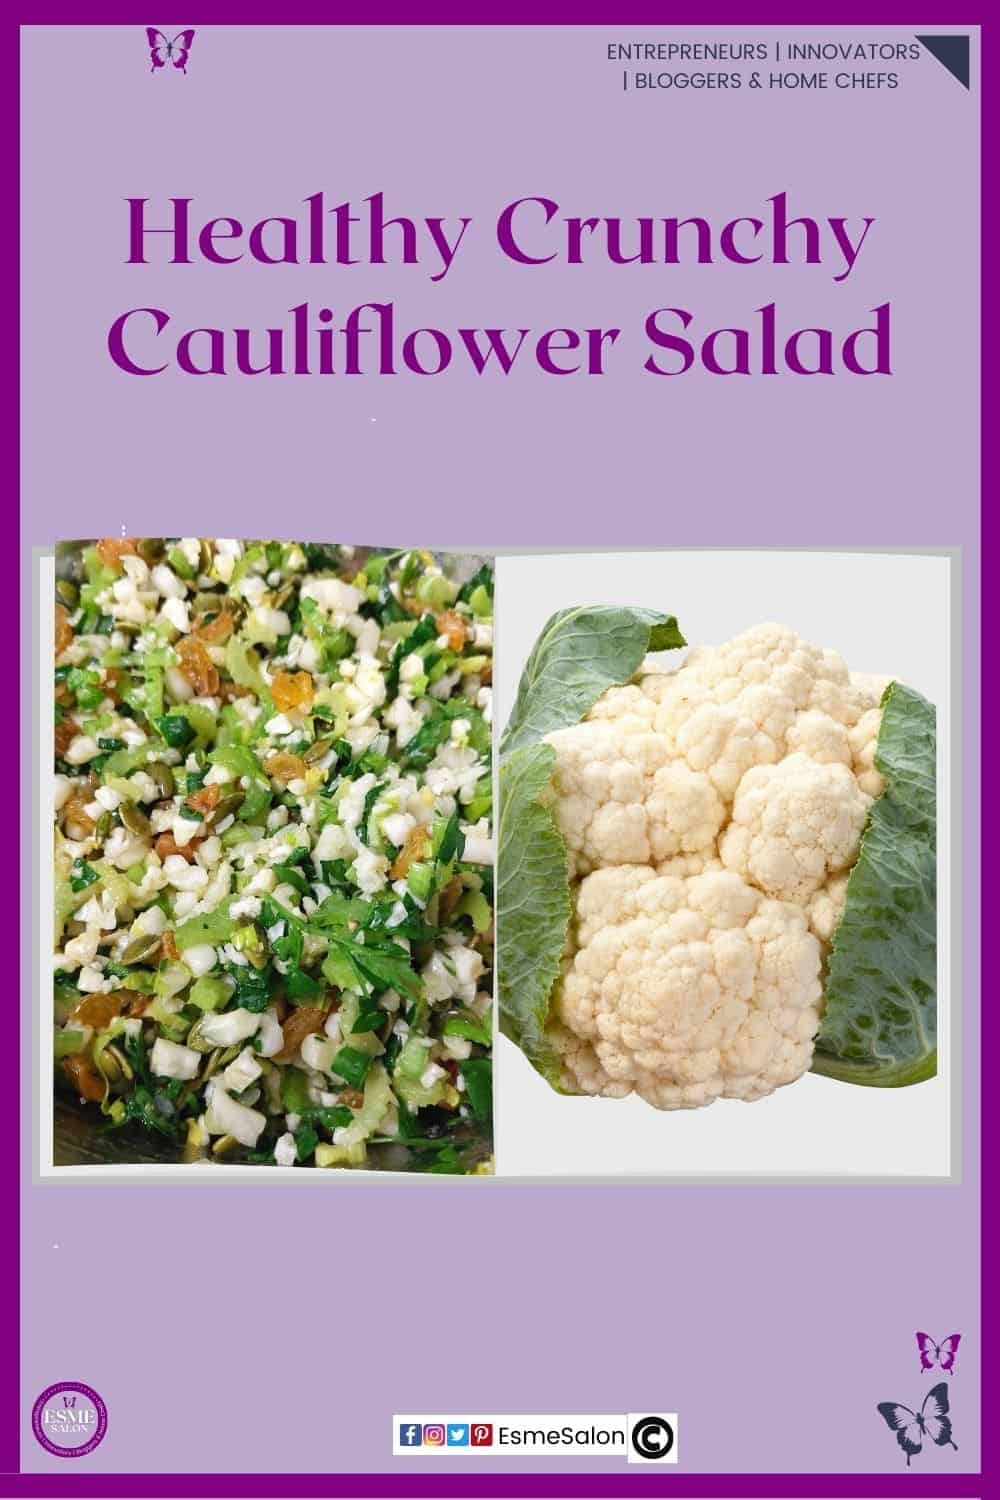 an image of a Crunchy Cauliflower Salad cut up into small bite size pieces